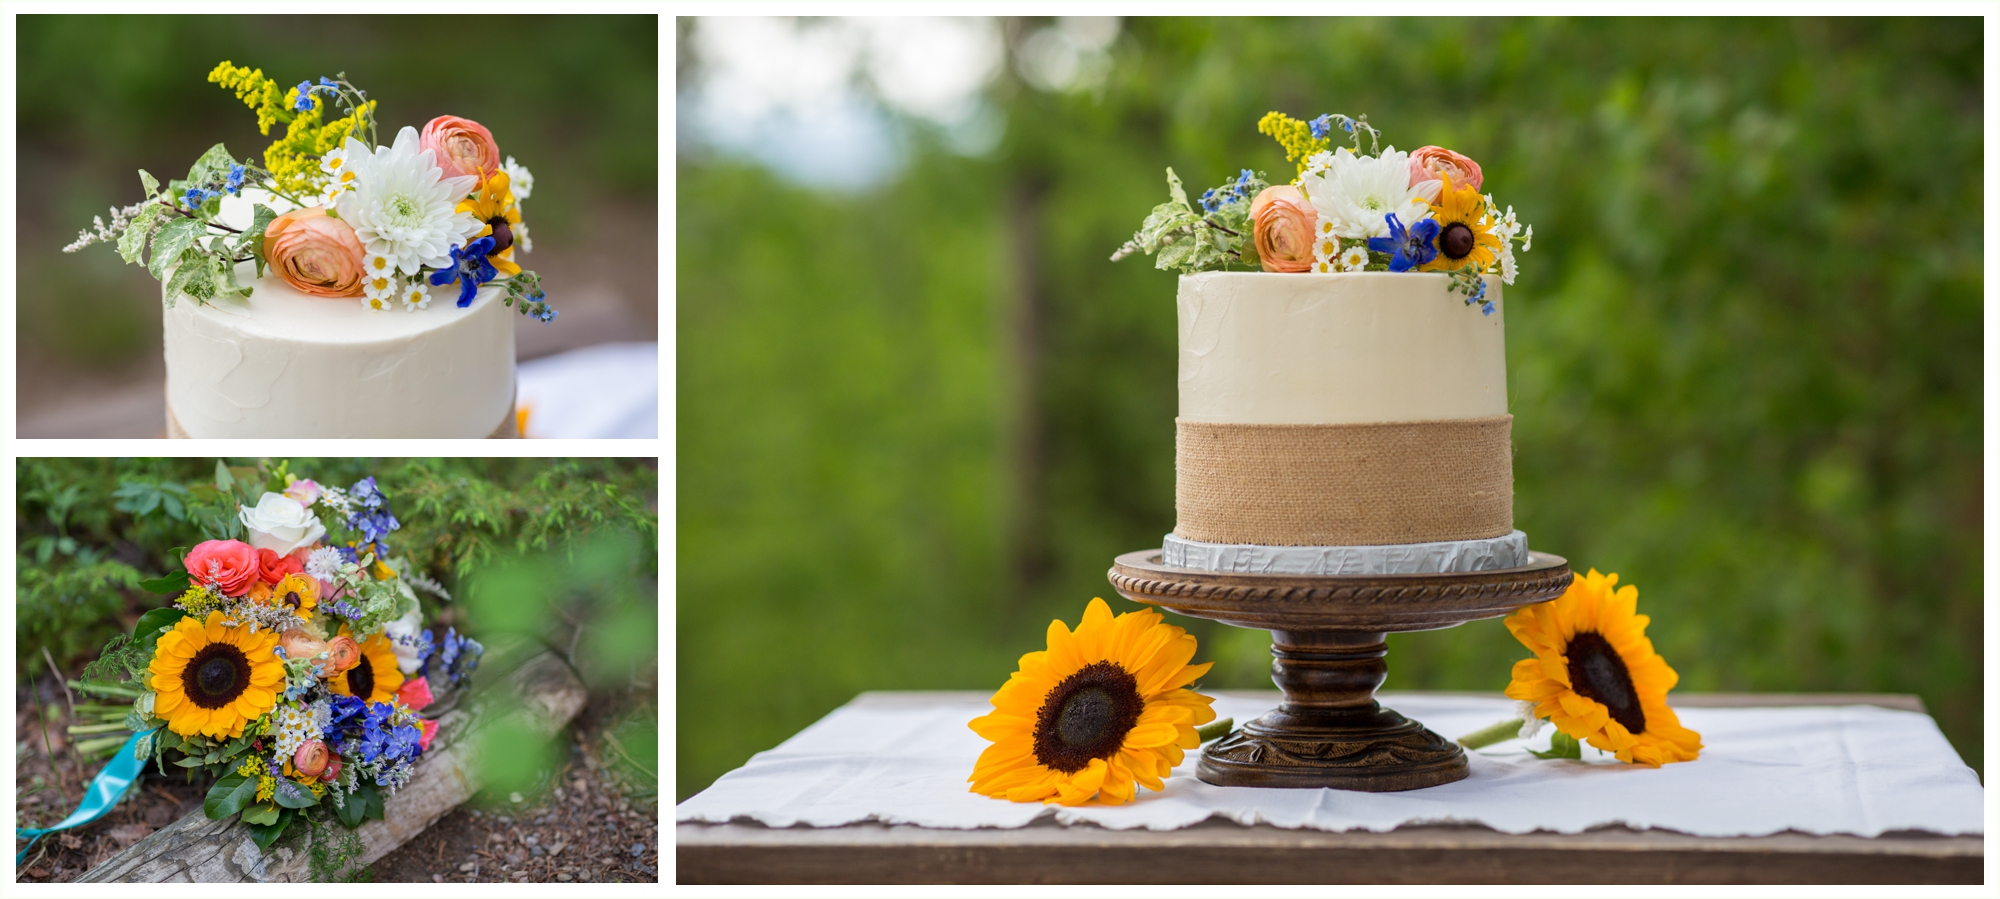 cutest cake for summer elopement in the mountains of colorado. sunflowers and bright colors